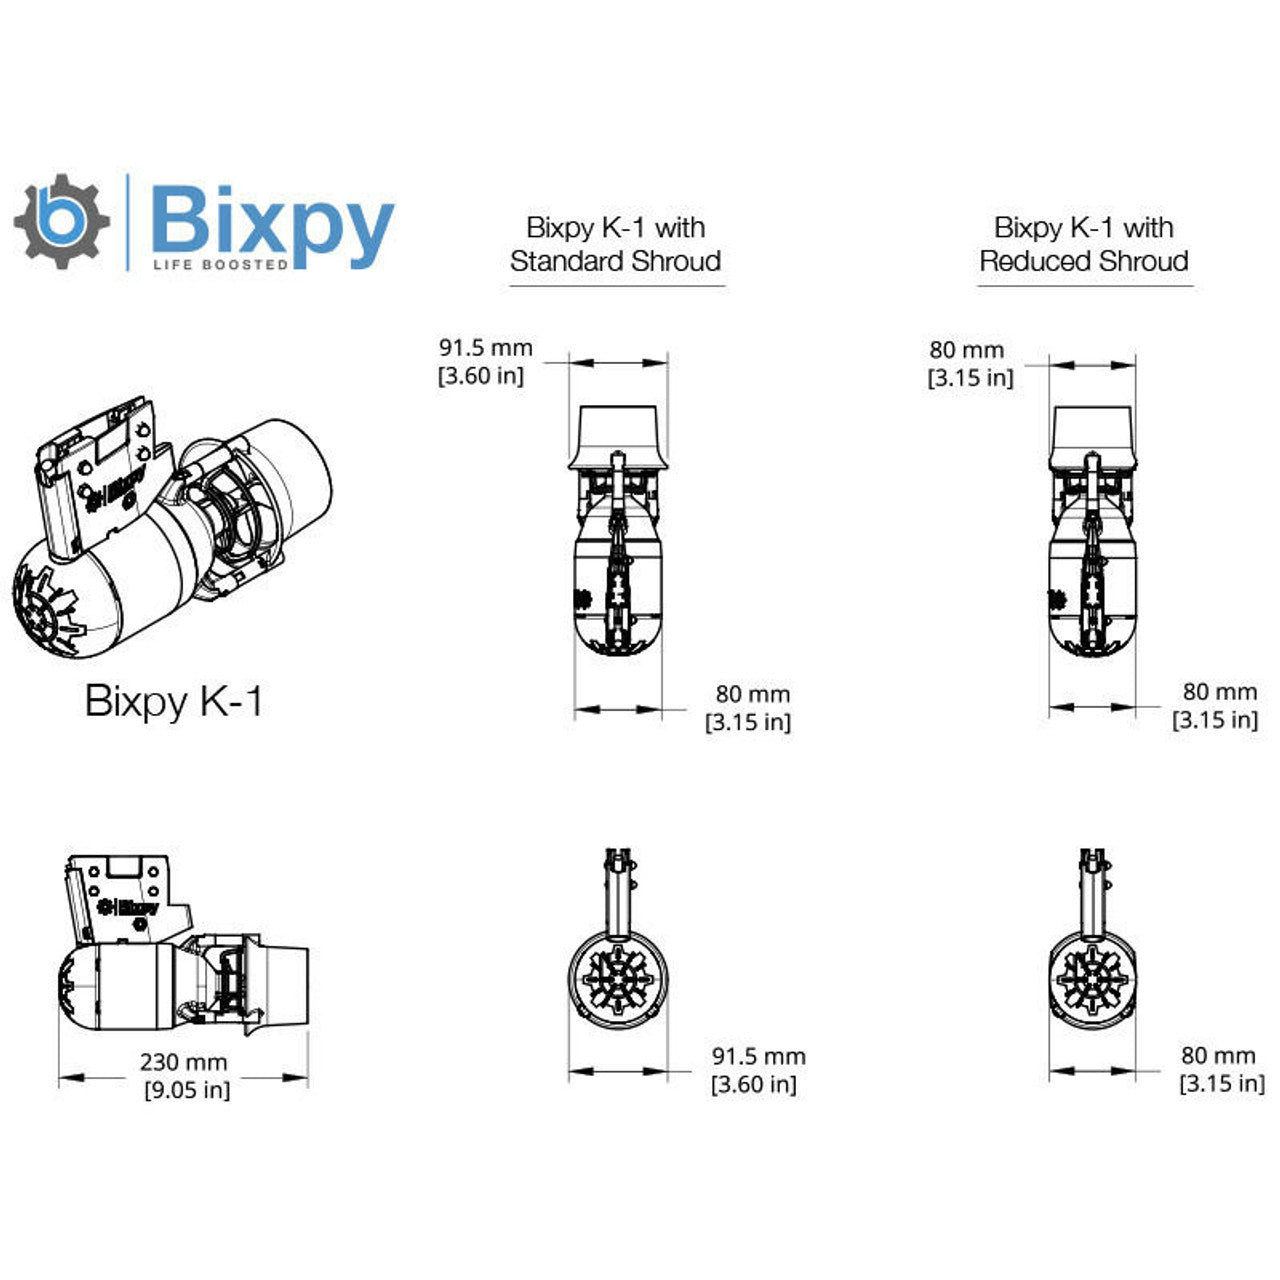 Bixpy K1 Angler Pro Outboard Kit is exclusively available for pre-order